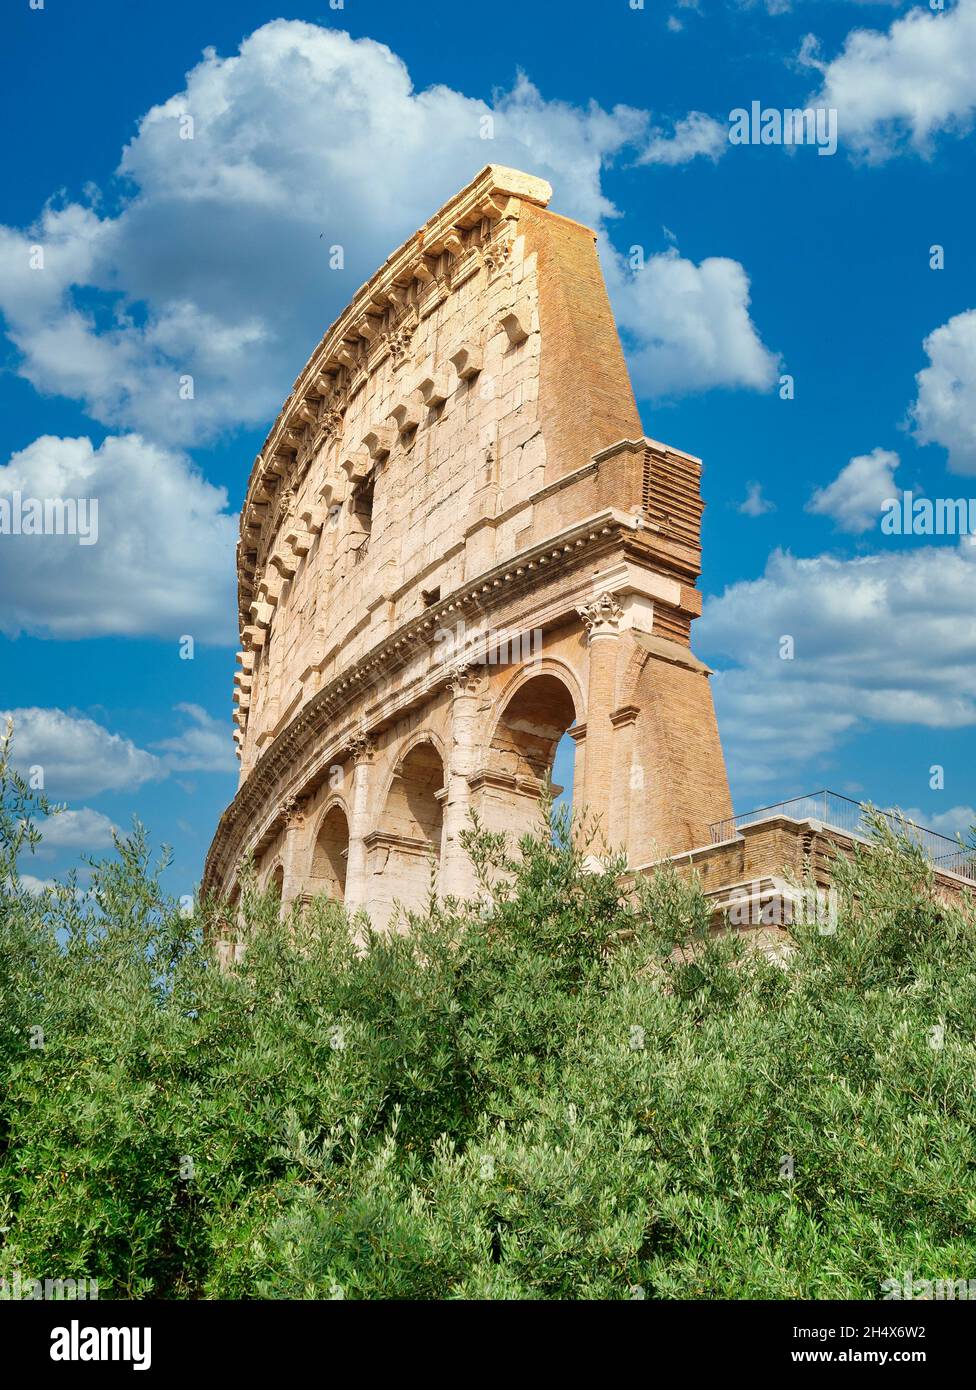 High section colosseum or coloseum in Rome Italy daytime Stock Photo